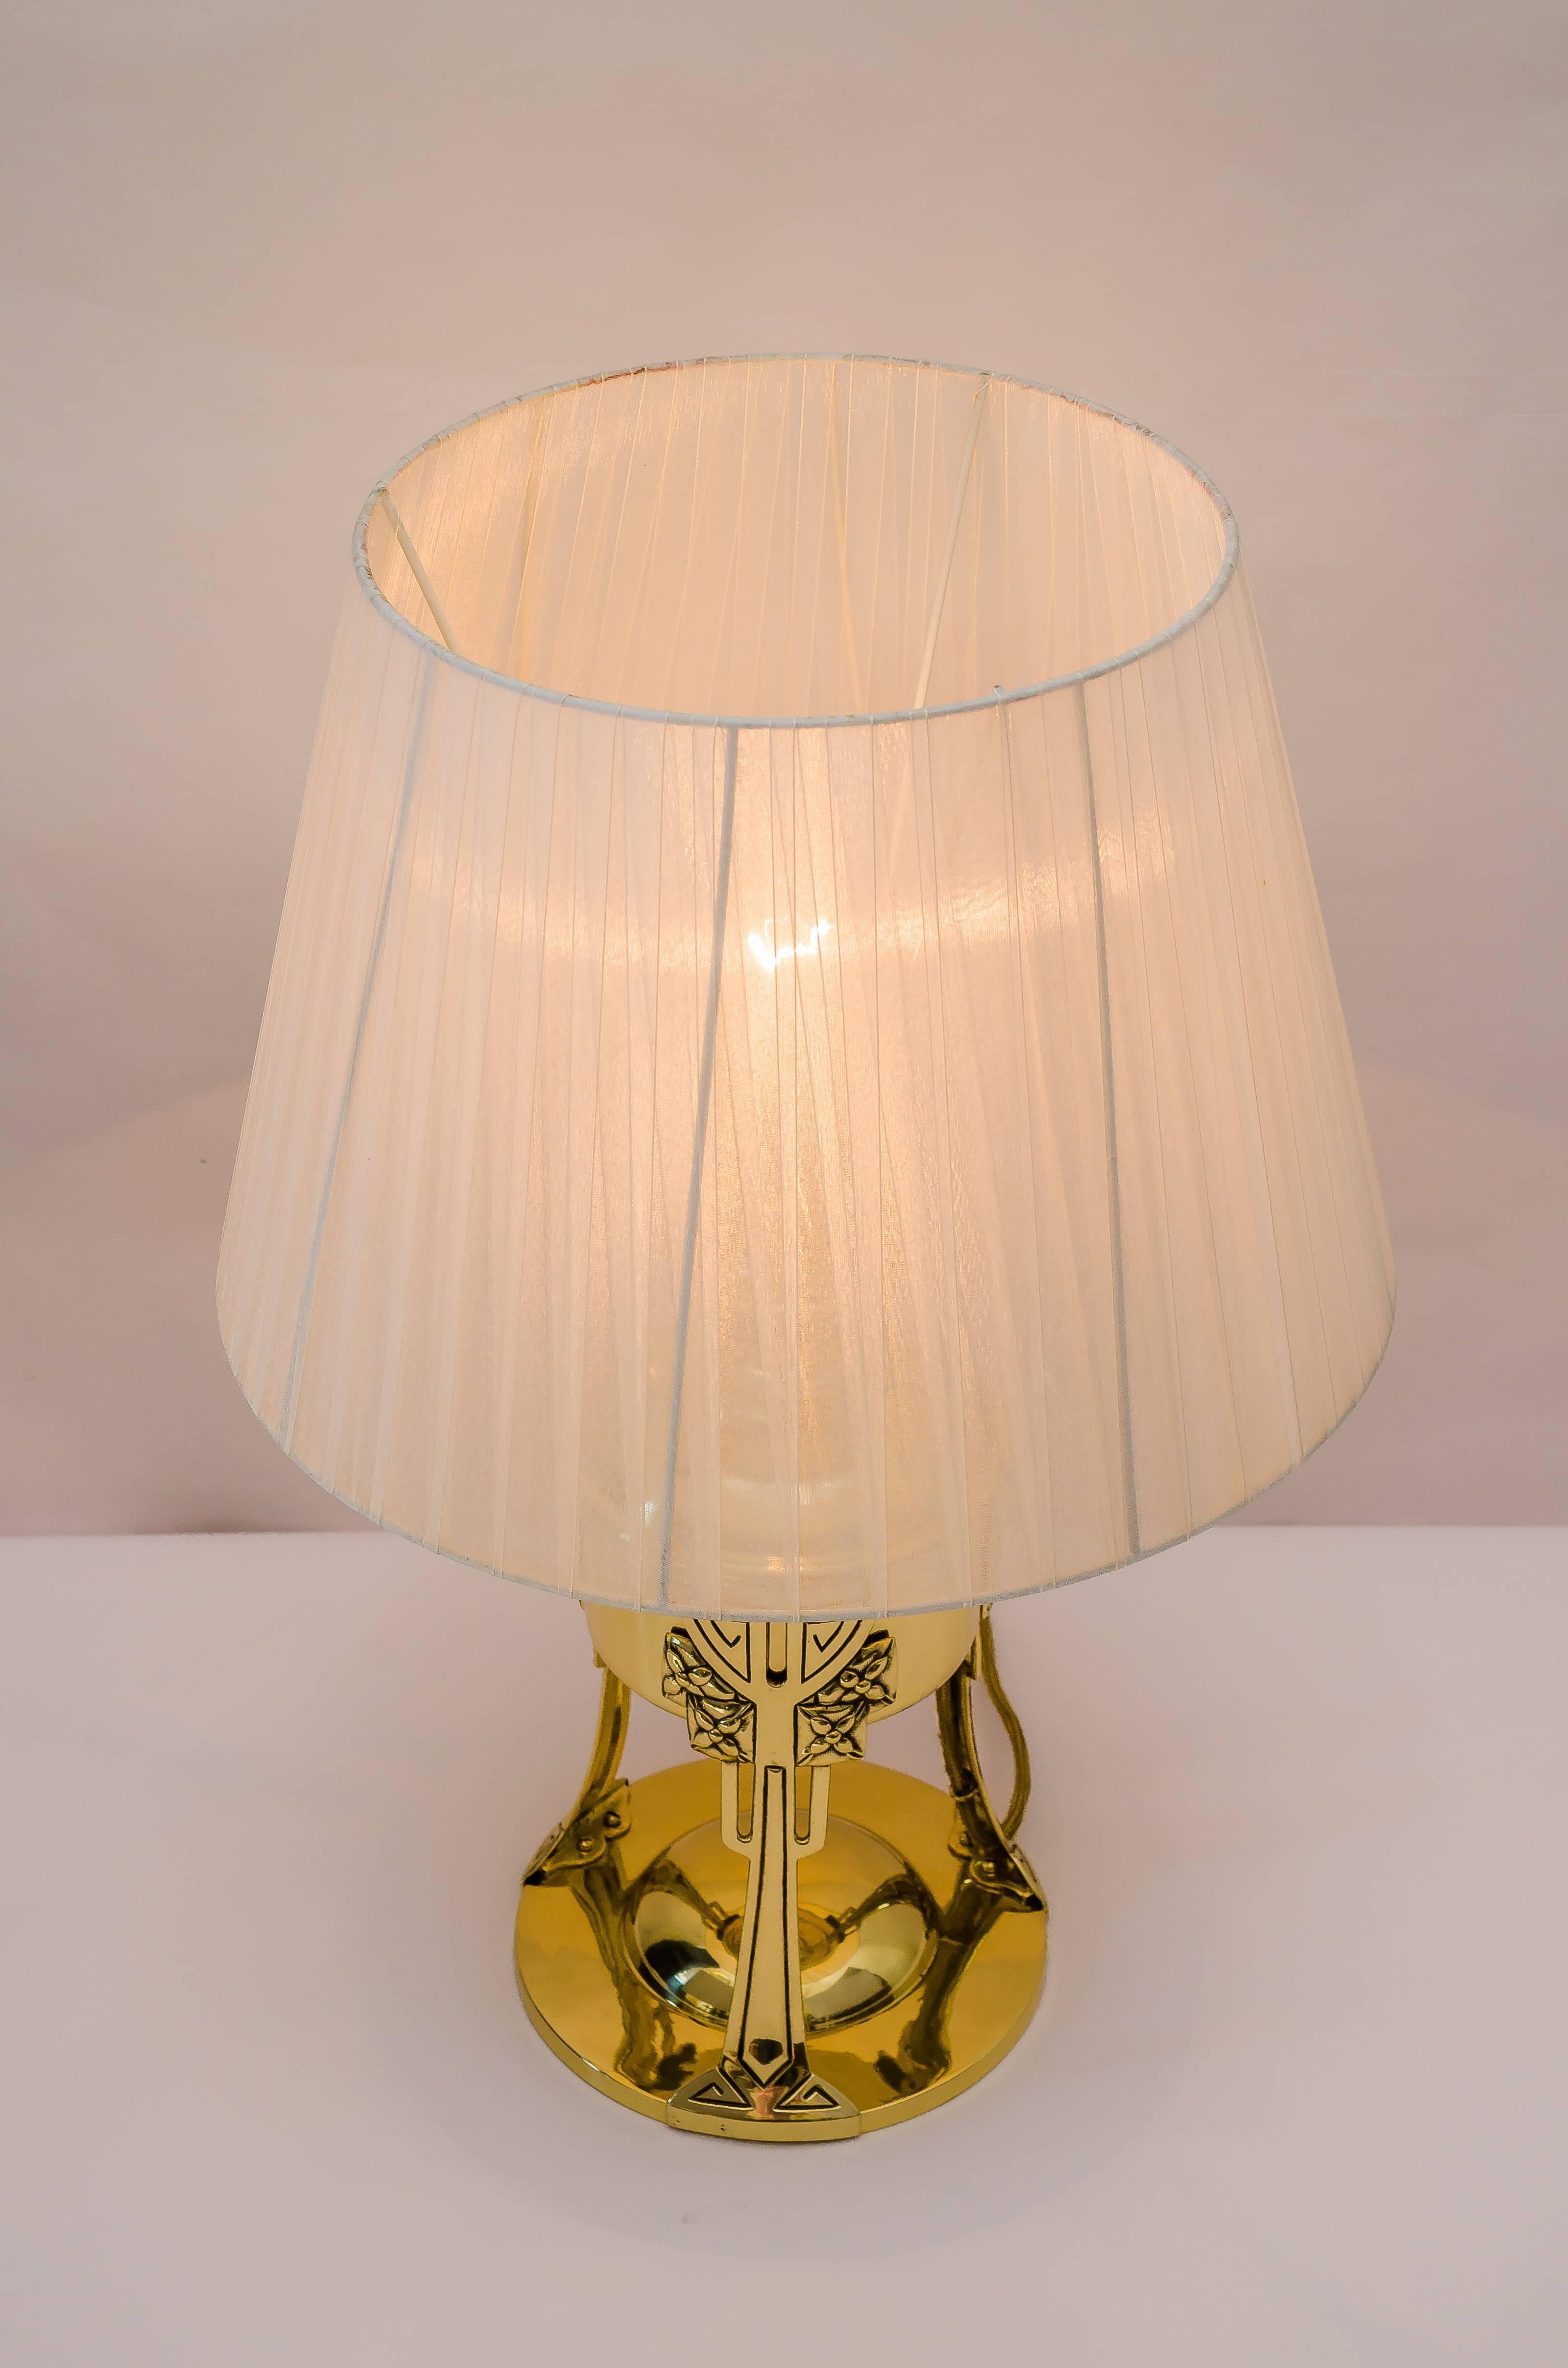 Lacquered Jugendstil Table Lamp with Fabric Shade, 1907 For Sale